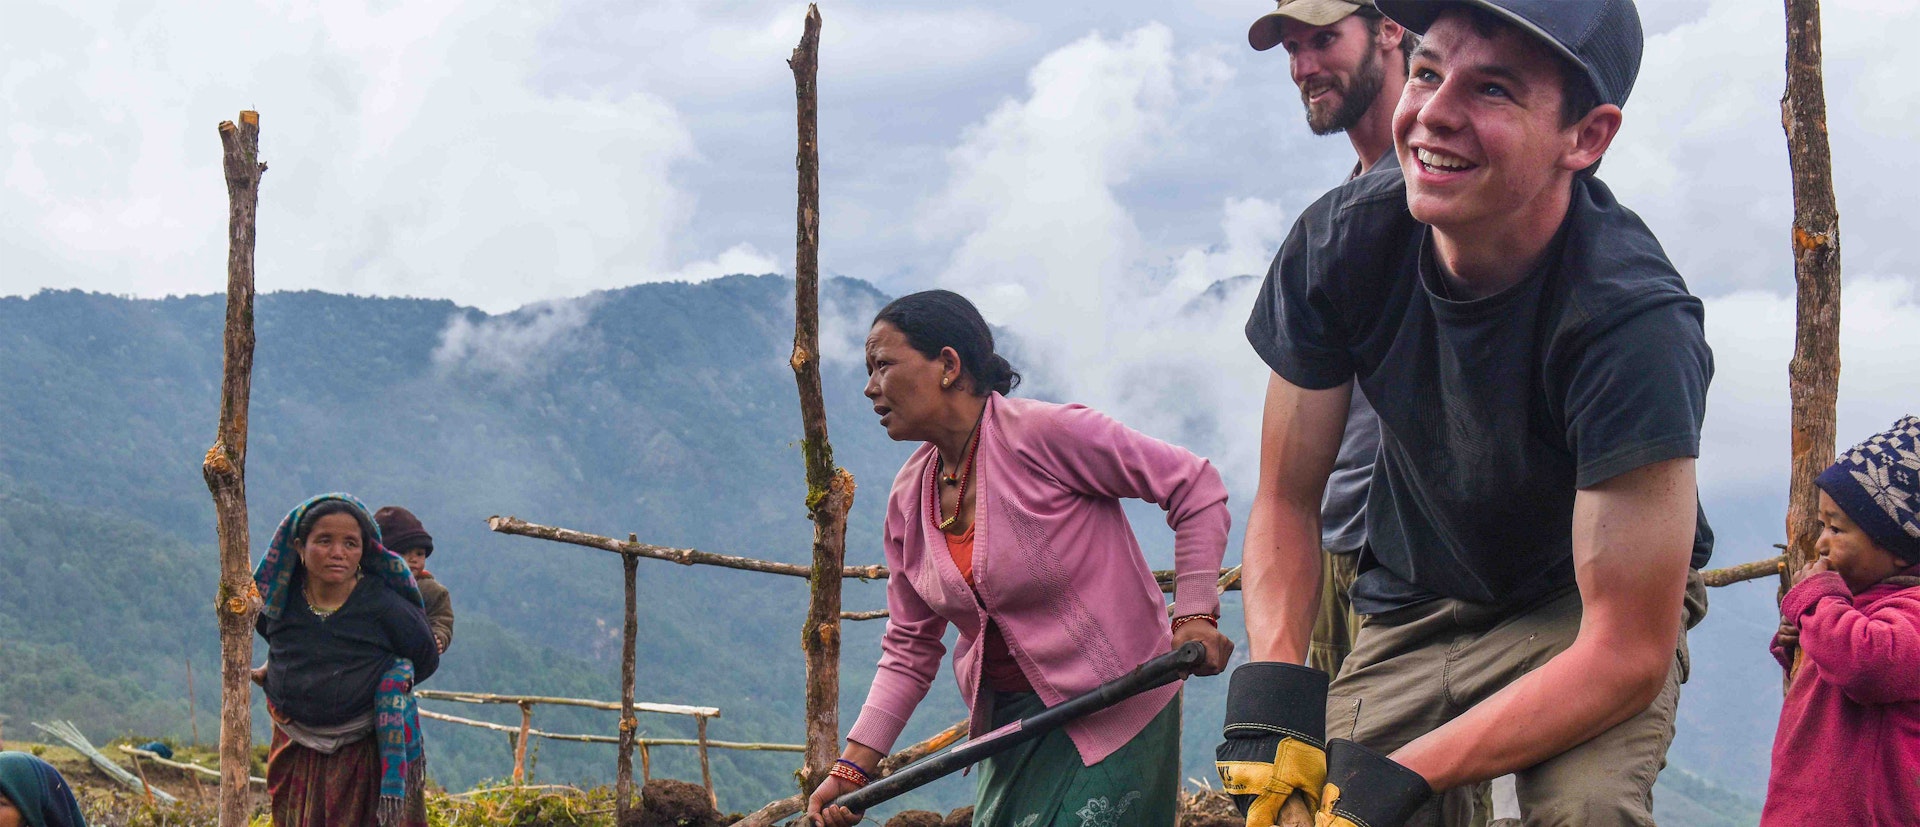 Matt Moniz is helping Nepal recover from the earthquake that nearly killed him